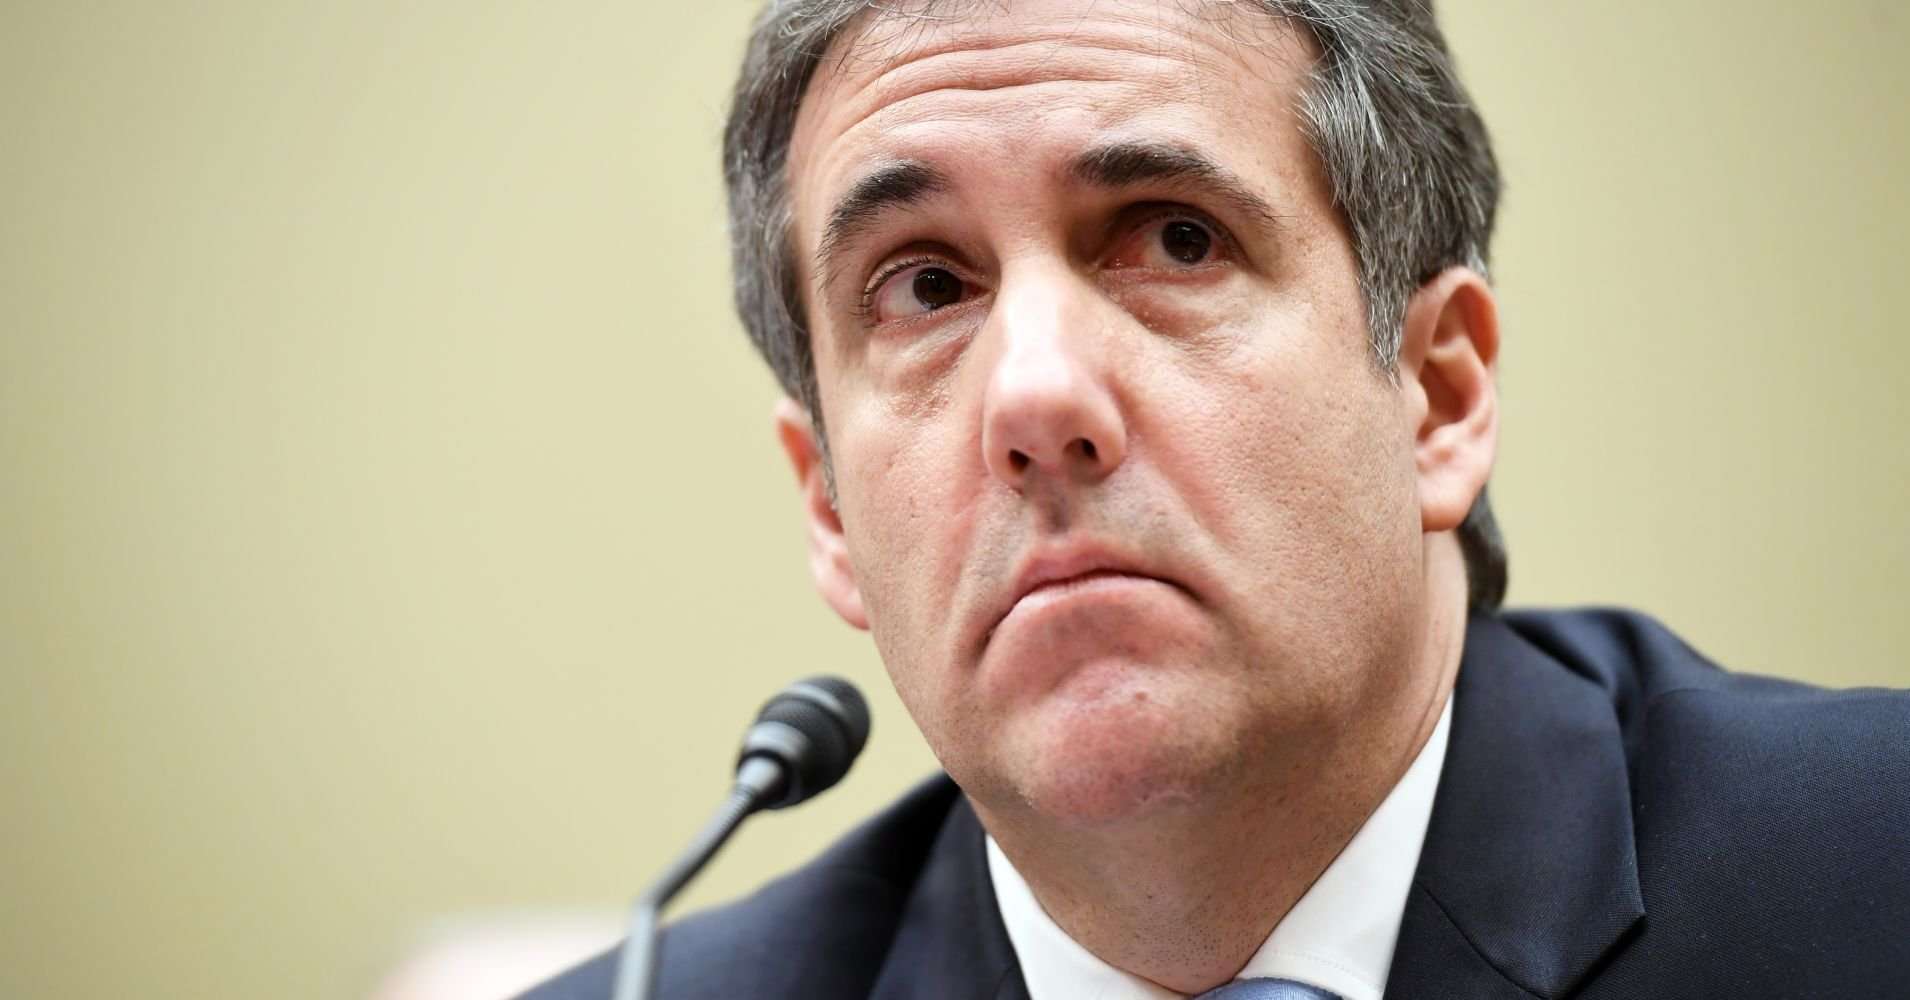 image for Trump claims his former lawyer and fixer Michael Cohen 'directly asked me for a pardon'